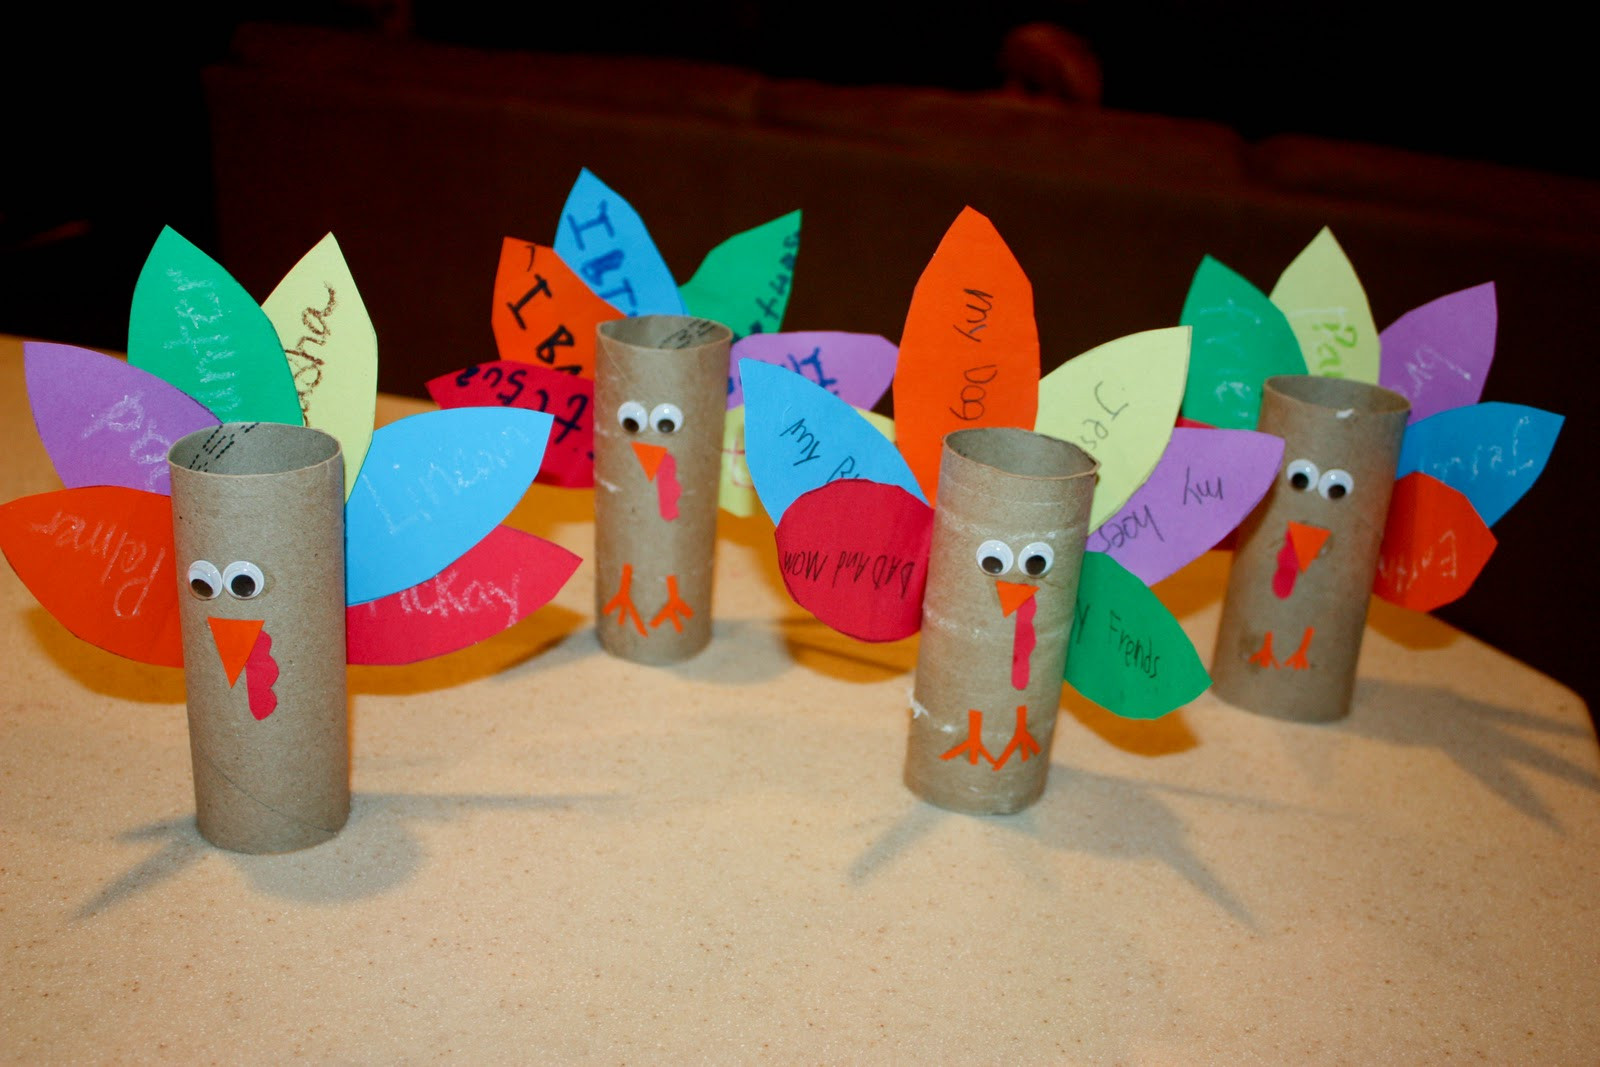 Thanksgiving Toilet Paper Roll Crafts
 Toilet Paper Roll Turkey Craft Paper Crafts Ideas for Kids